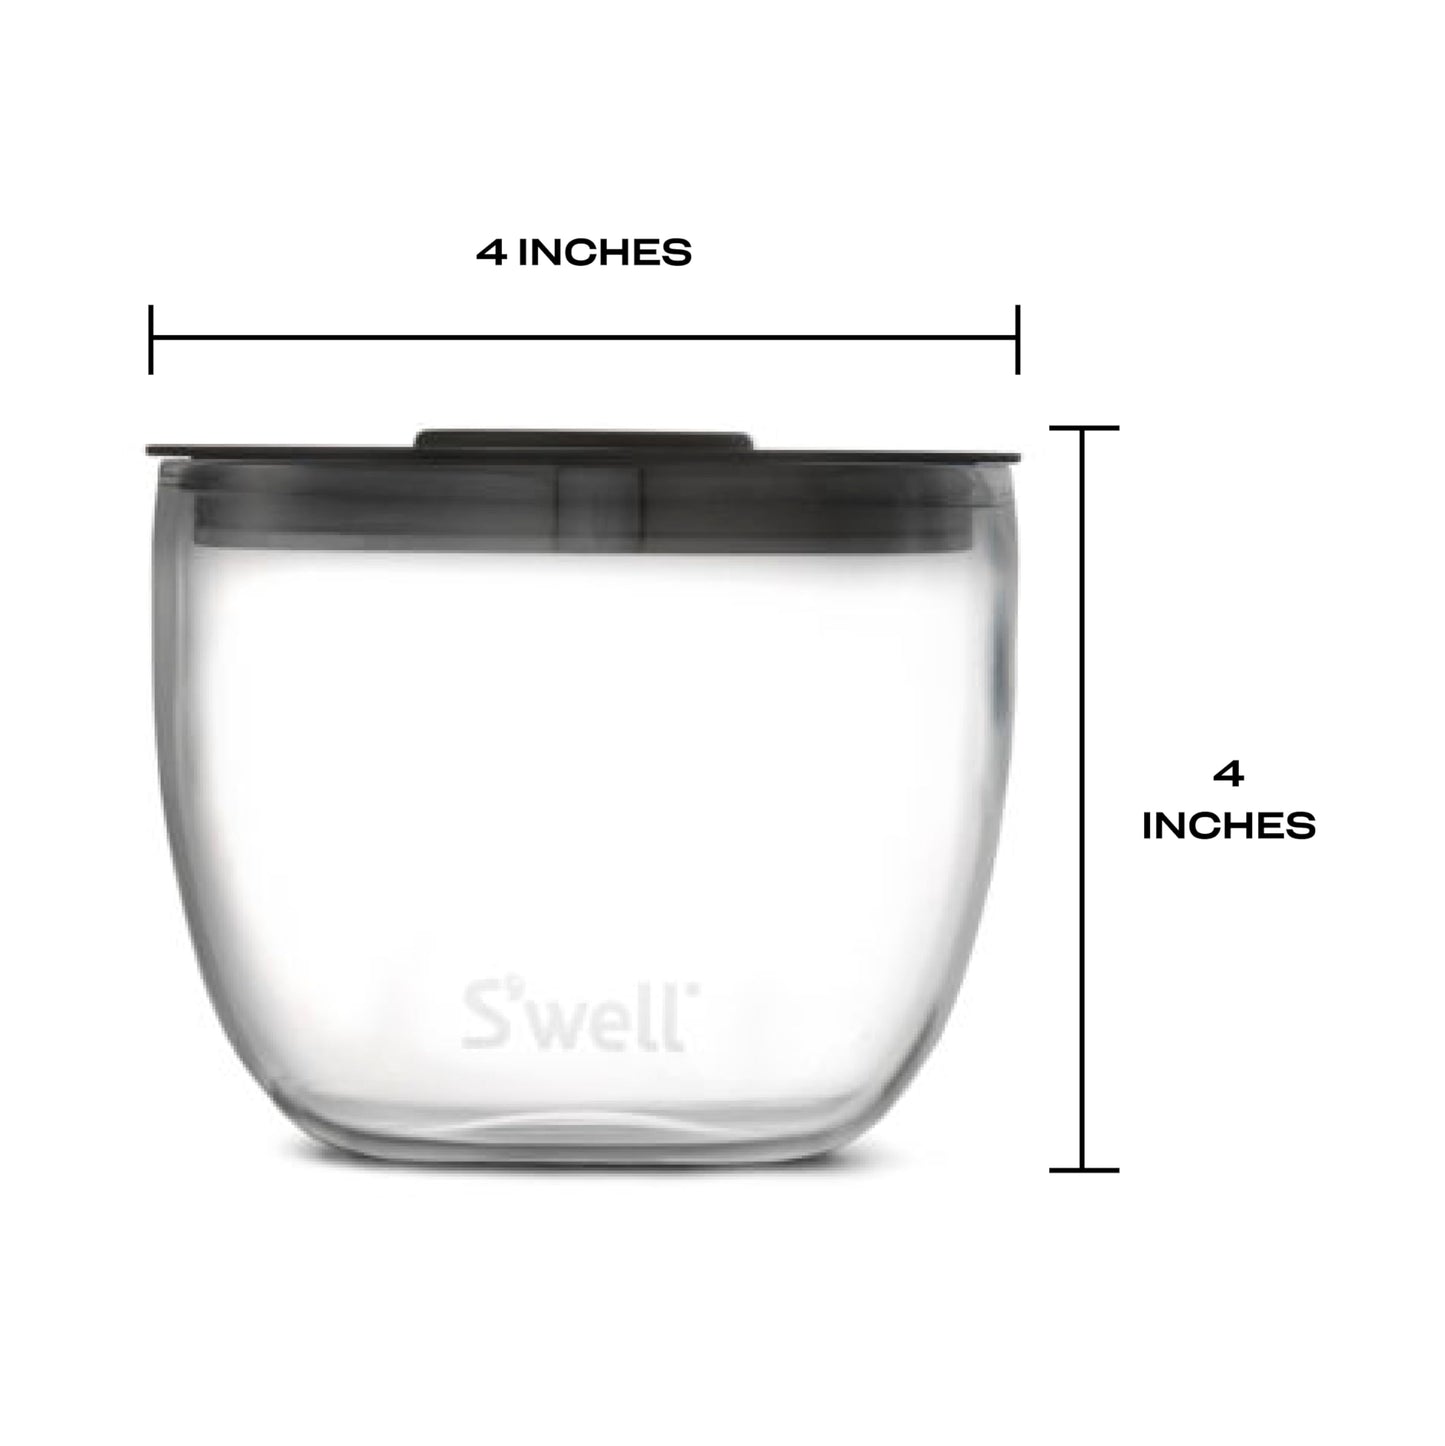 S'well Eats Stainless Steel Food Bowls, 21.5oz, Teakwood, Triple-Layered Vacuum-Insulated Containers Keeps Food Cold for 11 Hours and Hot for 7 hours, Condensation Free, BPA Free